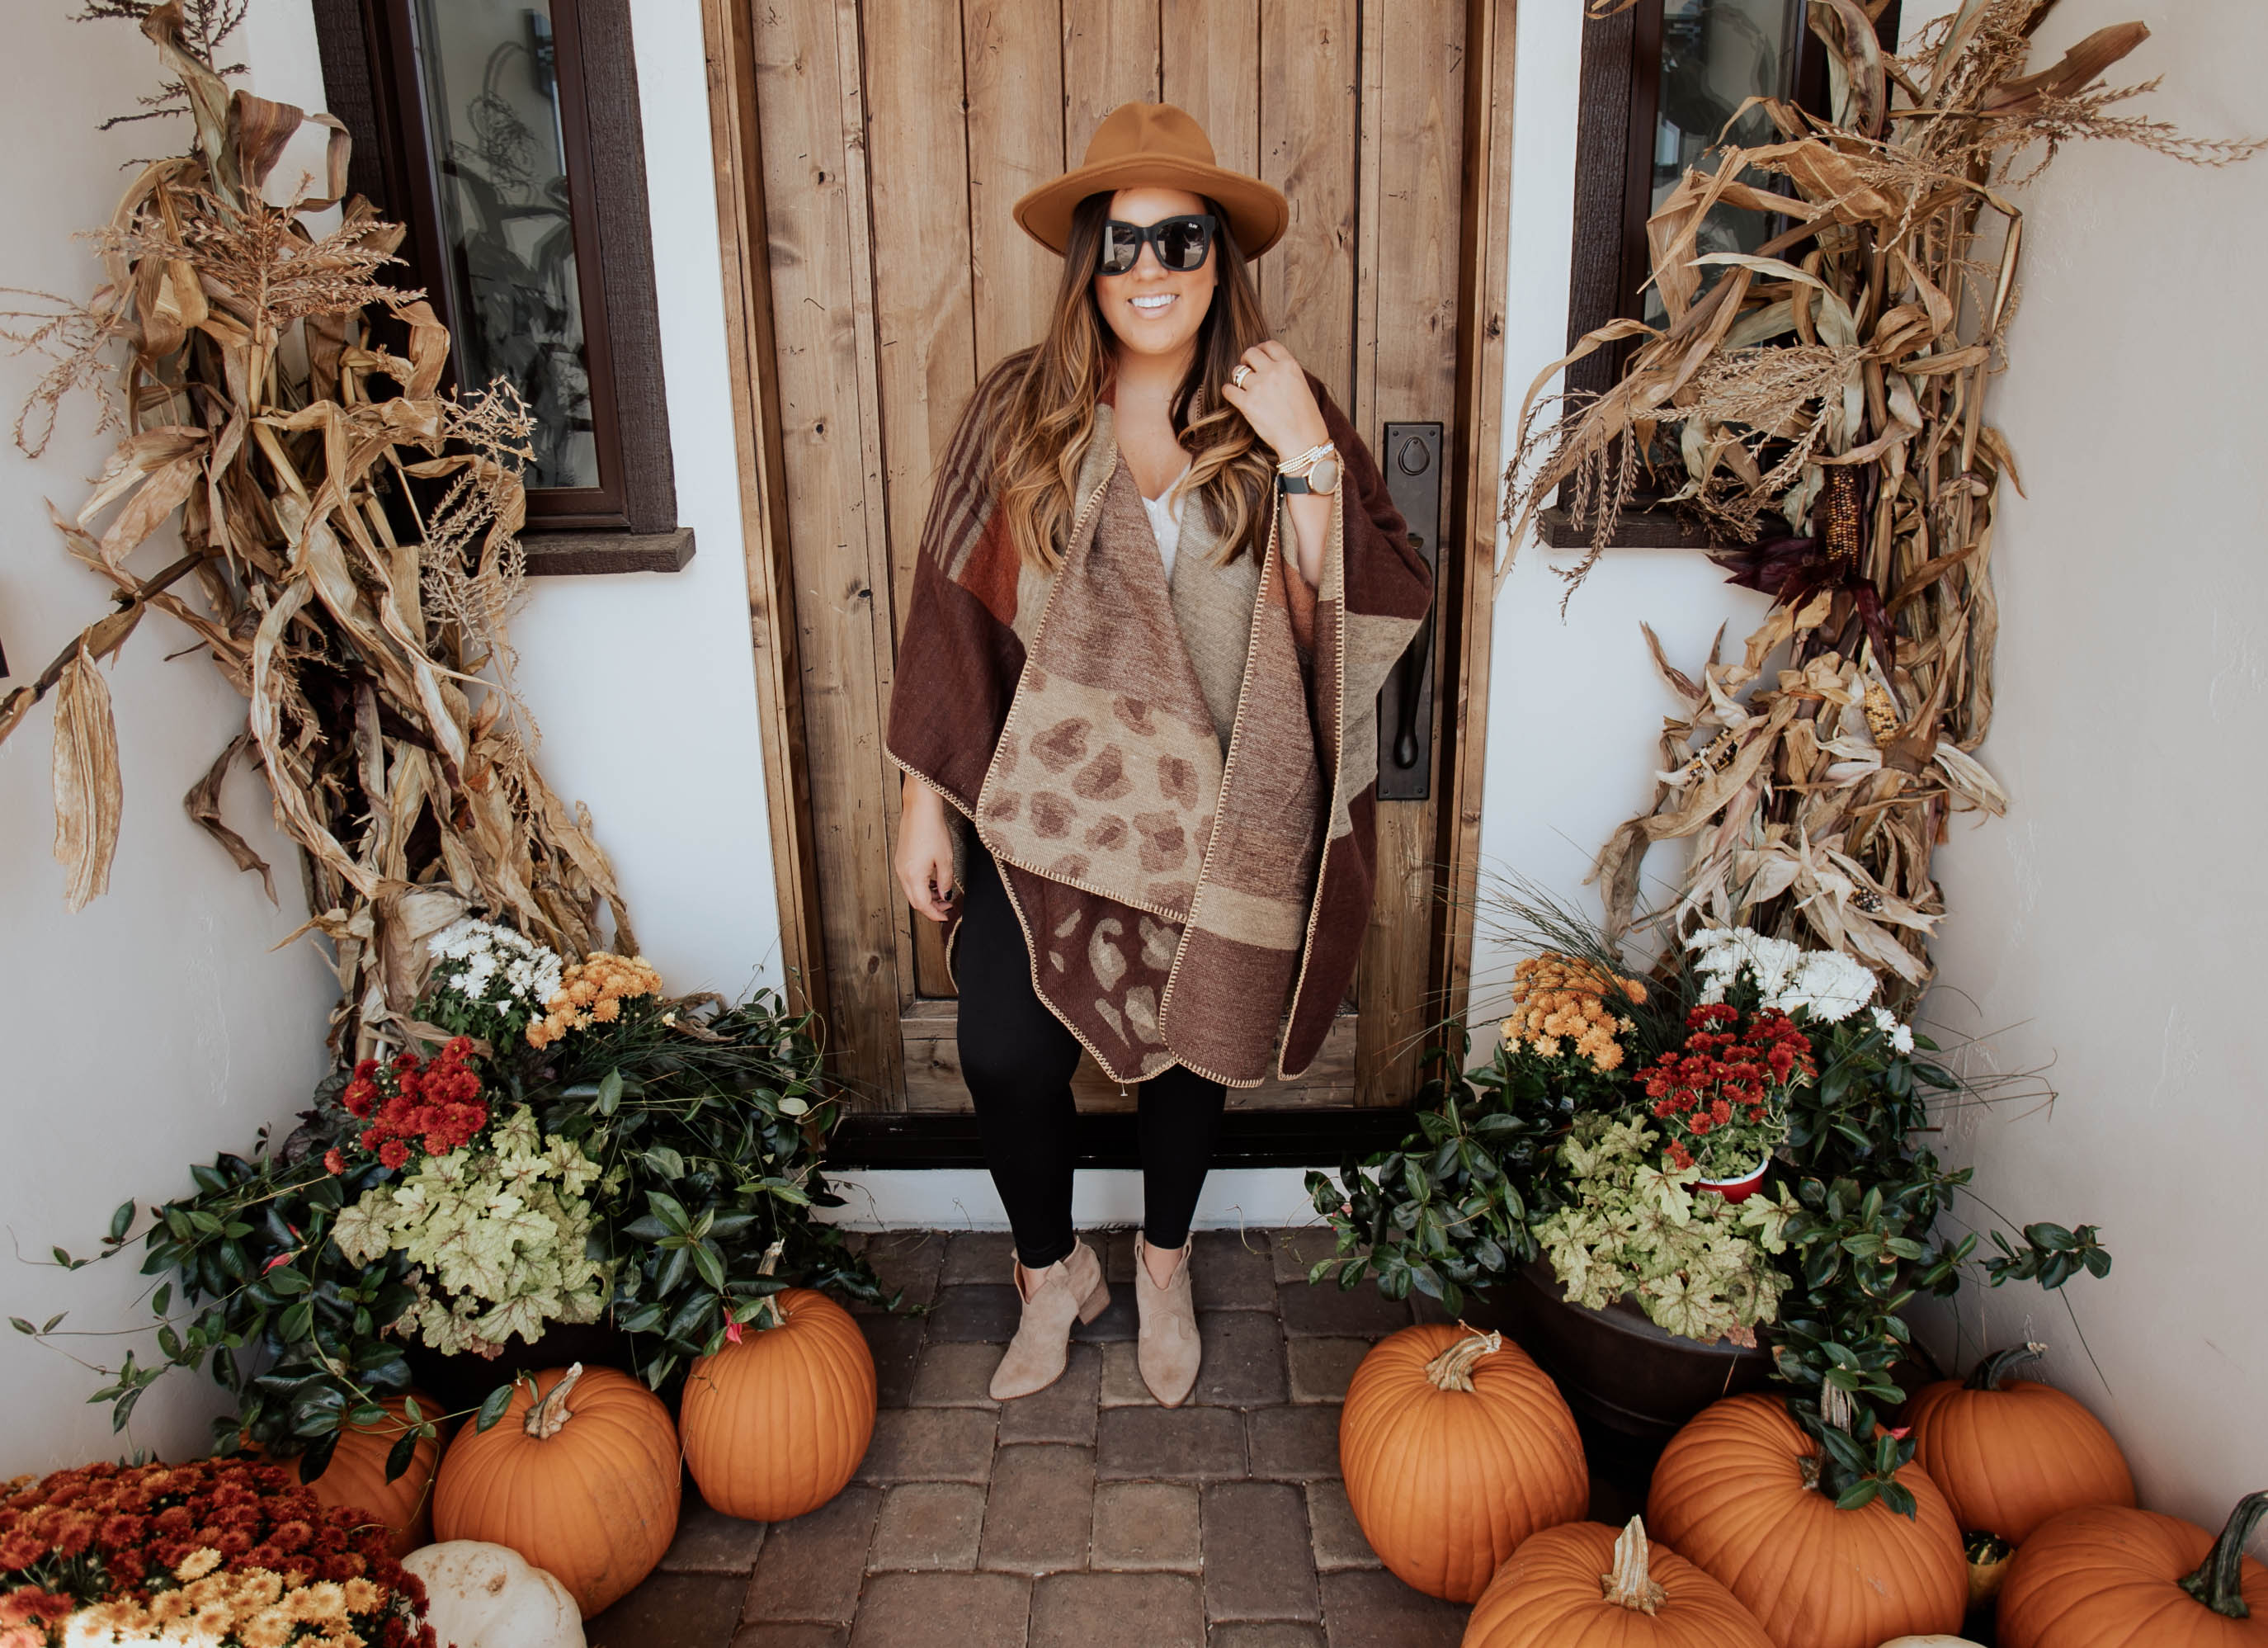 Reno fashion blogger, Ashley Zeal from Two Peas in a Prada shares her September Amazon favorites. She rounded up all the best items she ordered from Amazon last month!